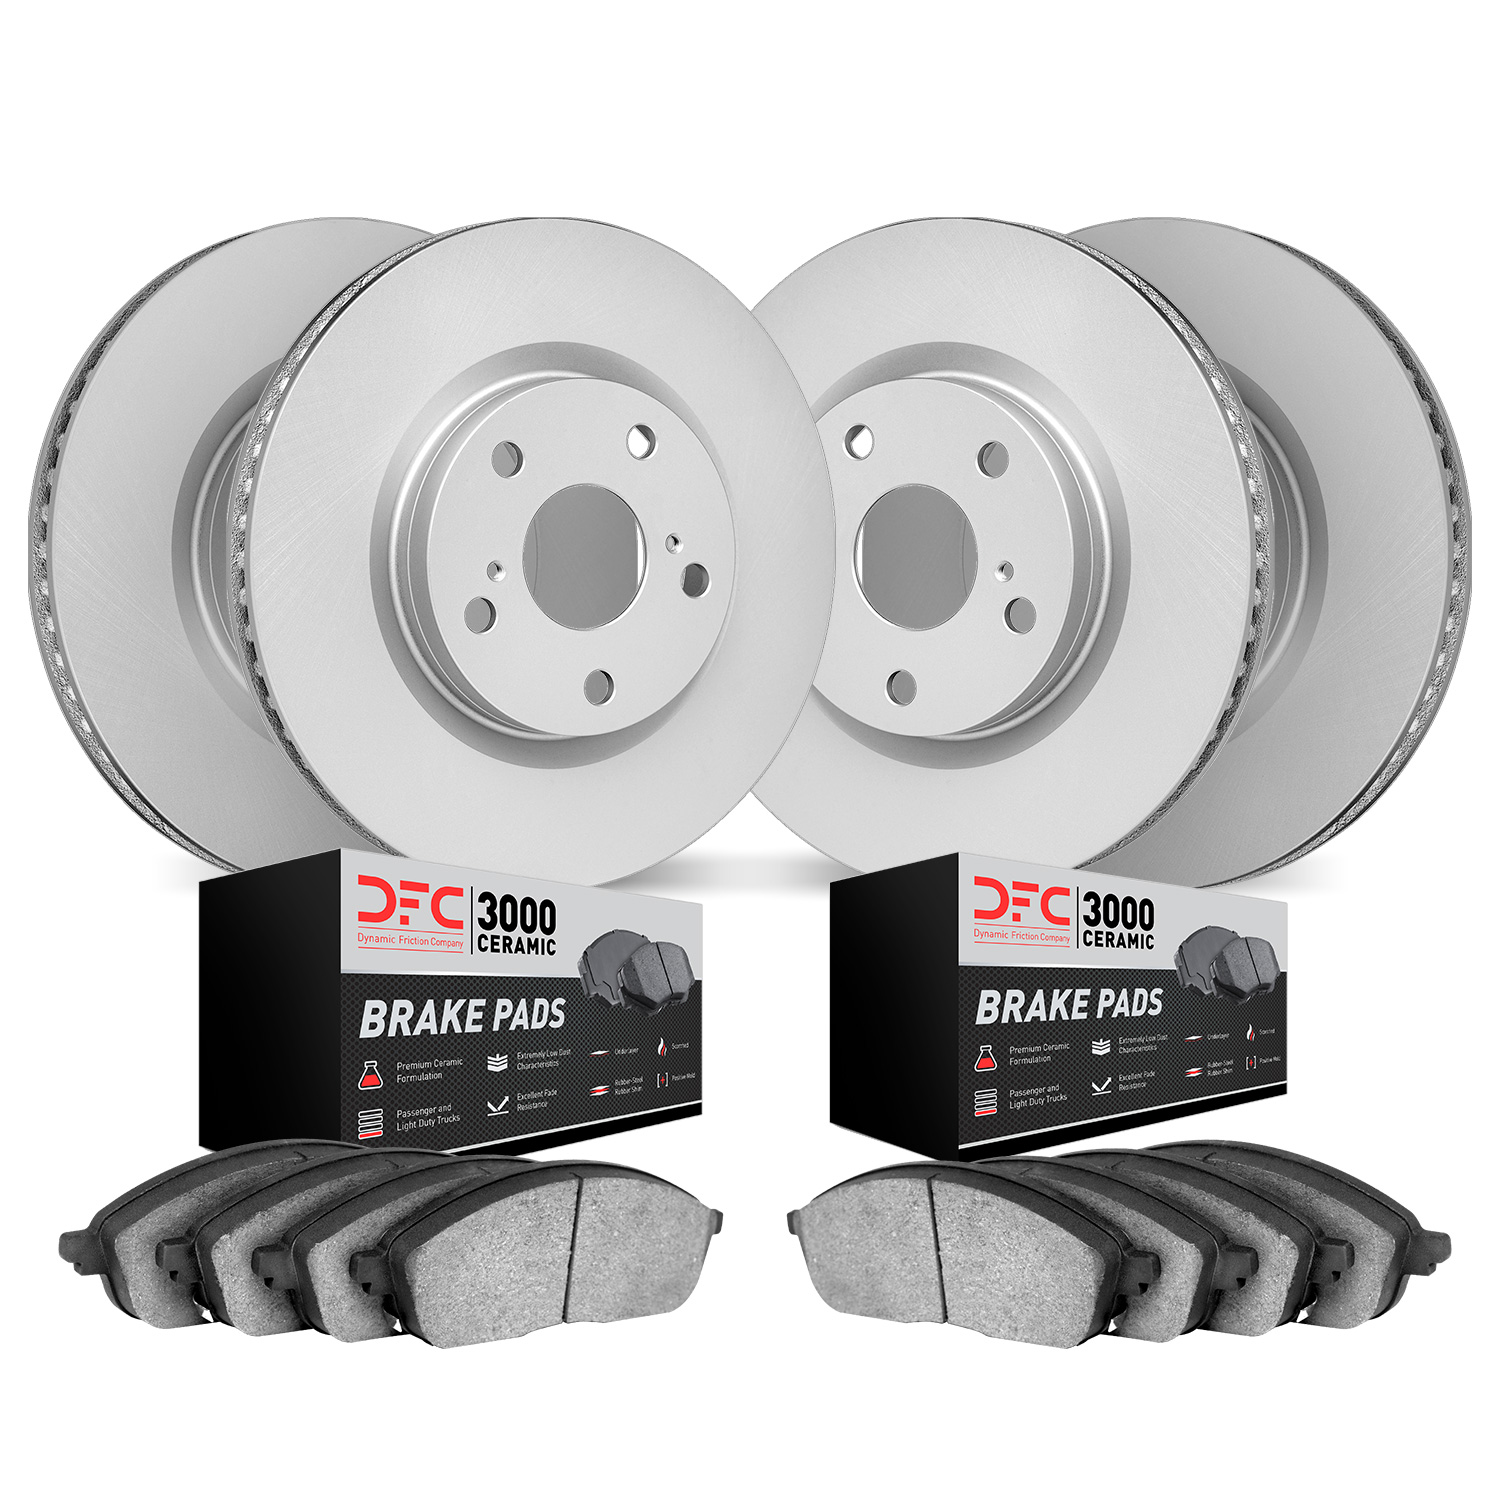 4304-31023 Geospec Brake Rotors with 3000-Series Ceramic Brake Pads Kit, 2004-2006 BMW, Position: Front and Rear